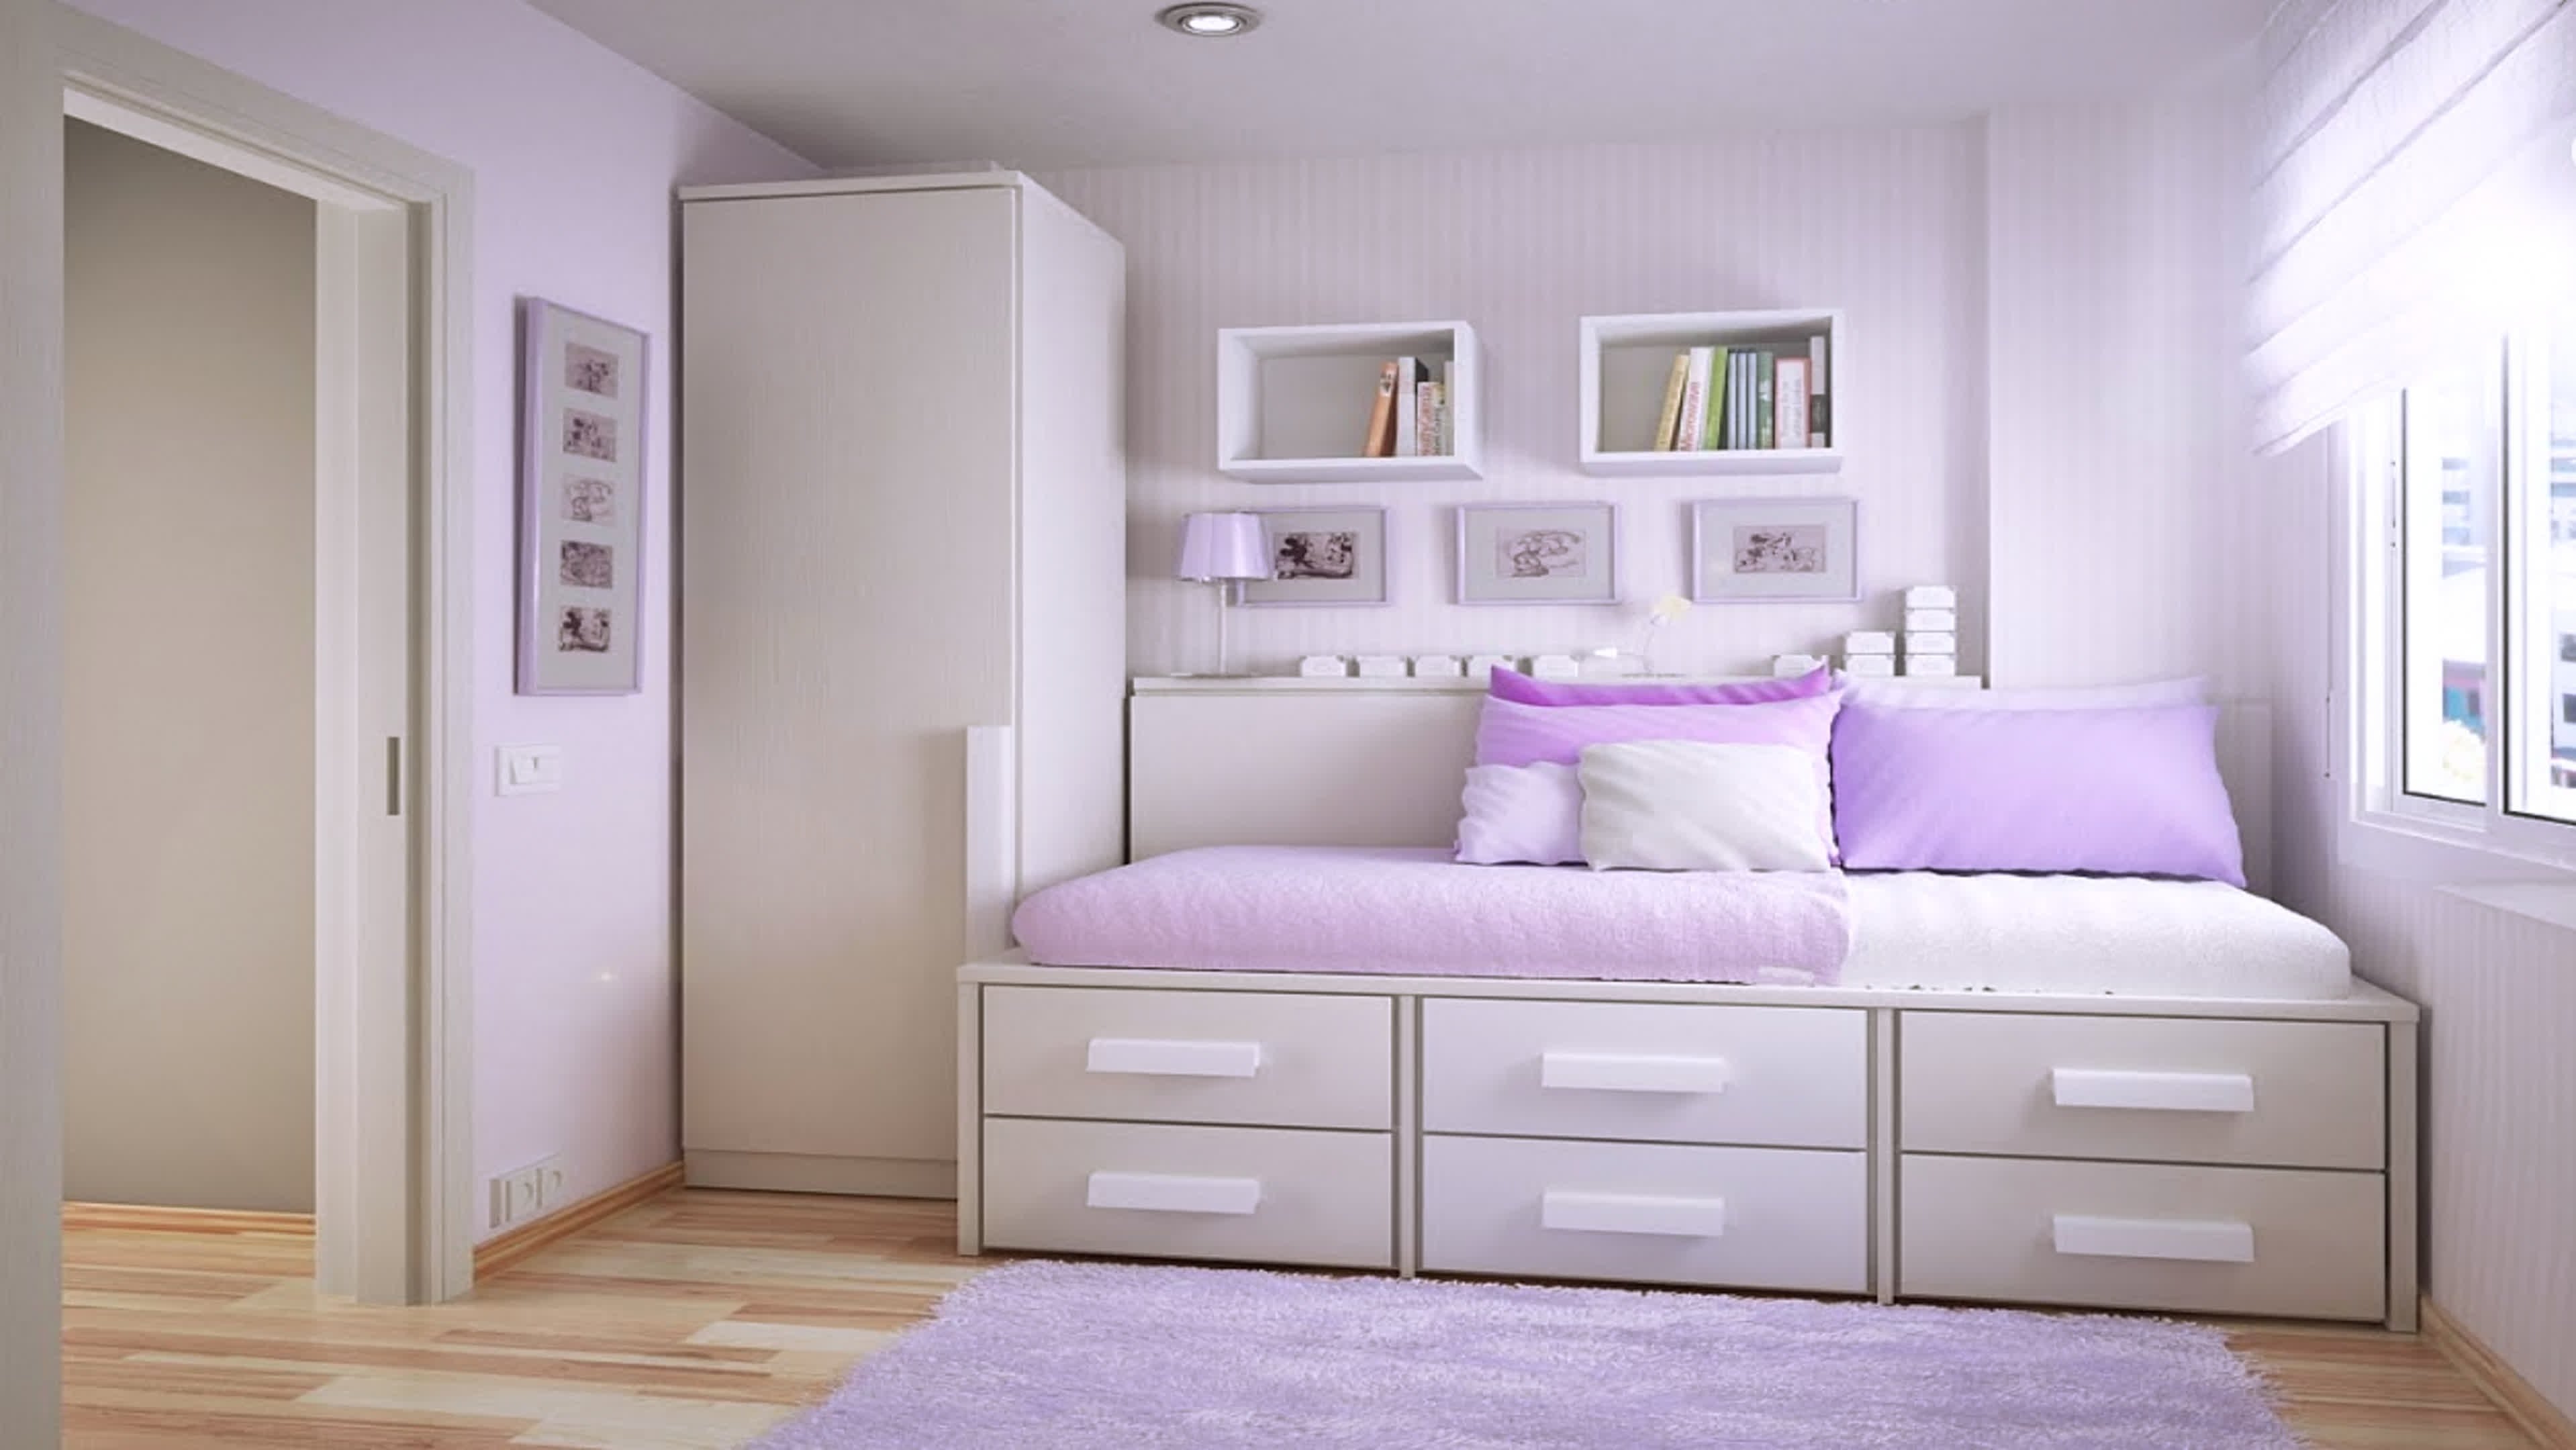 10 Famous Bedroom Ideas For Teenage Girls simple bedroom design for teenage girl bedroom simple bedroom design 2022